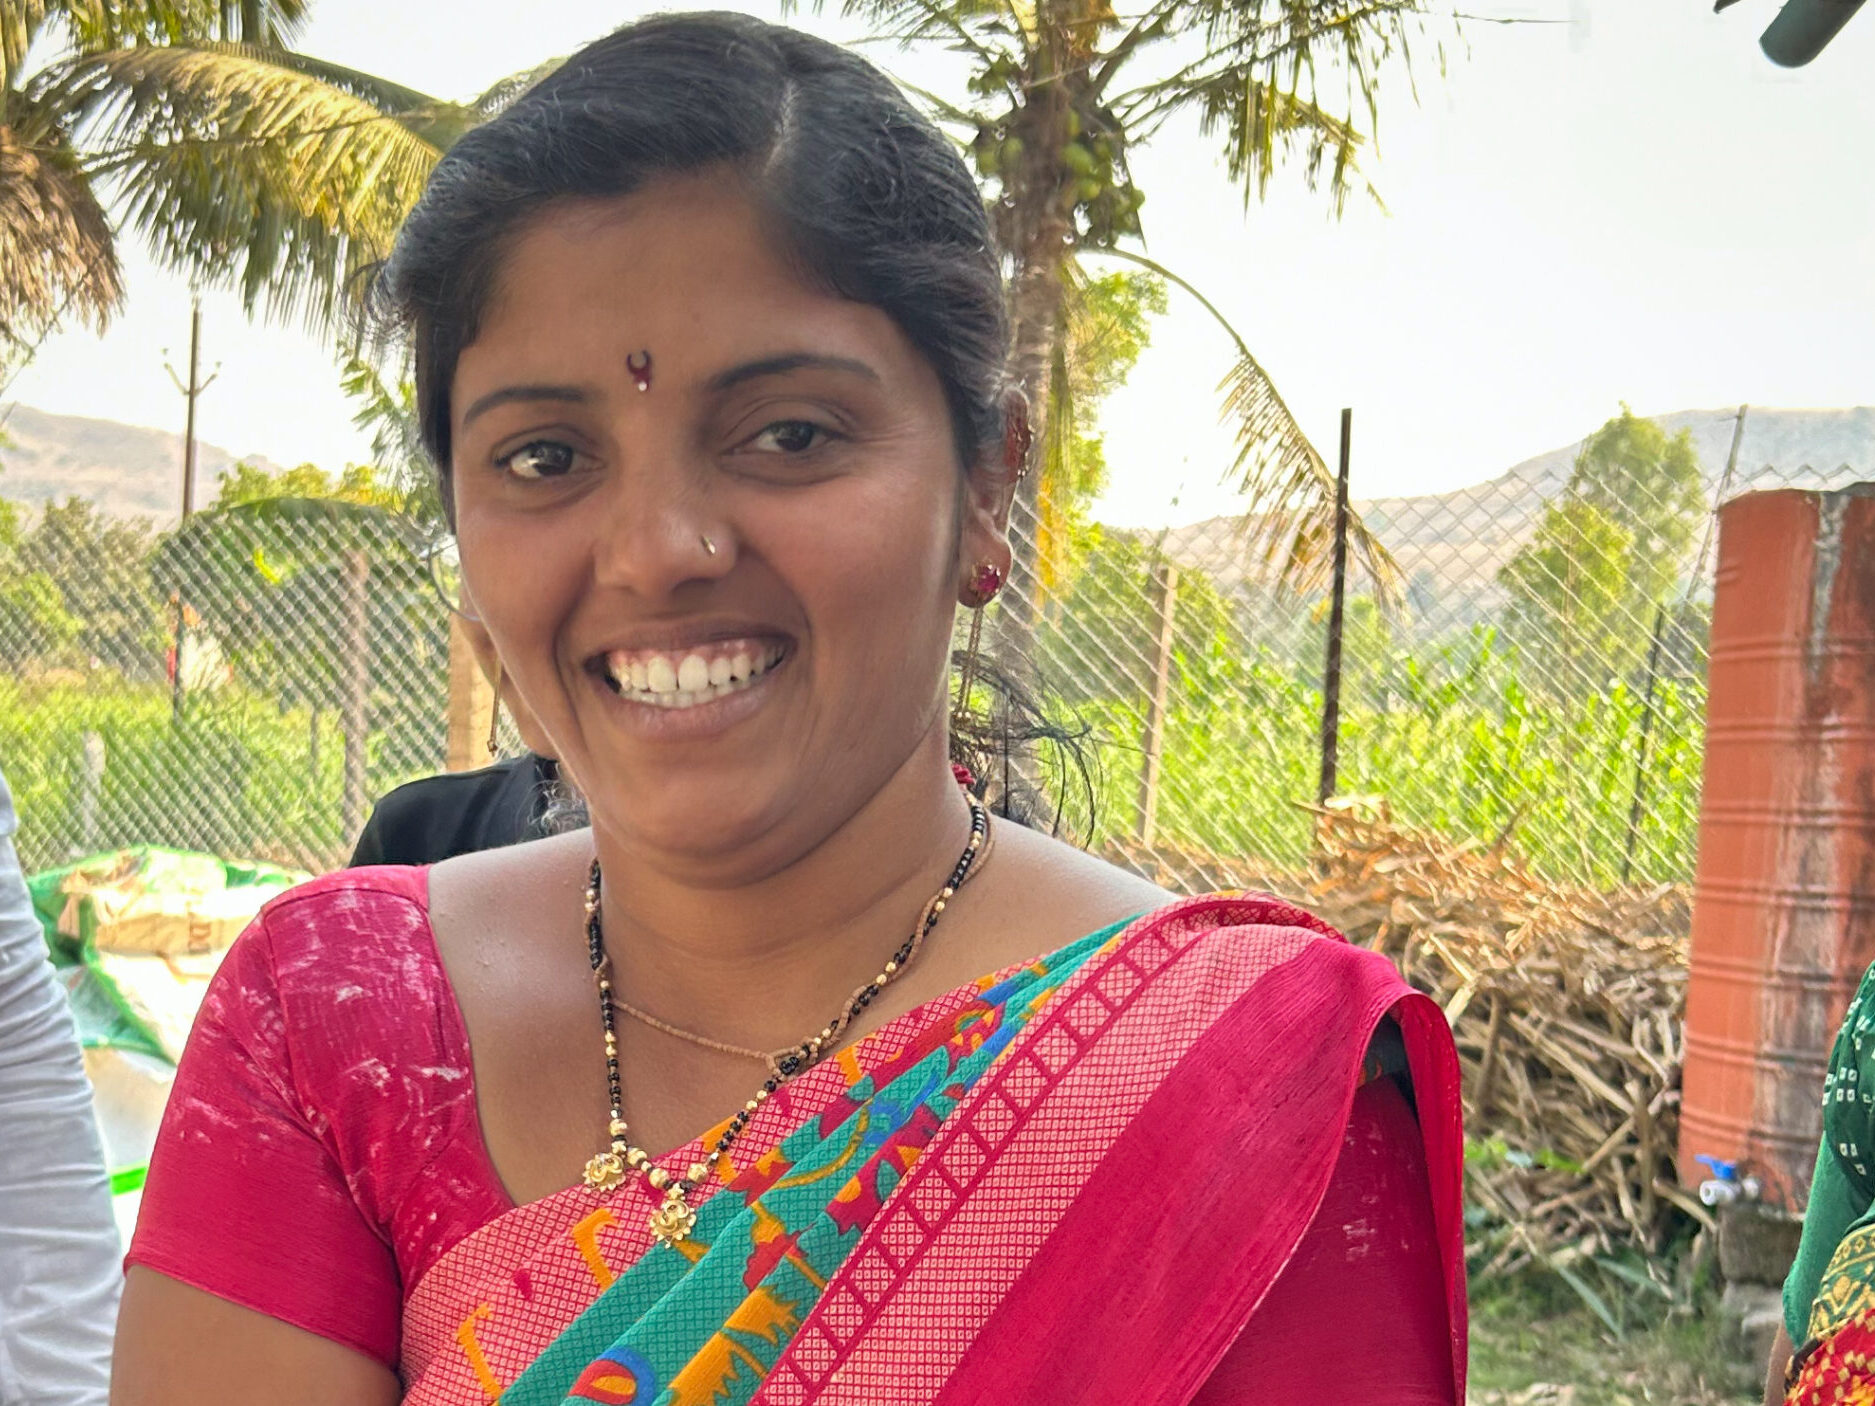 Swati Sanjay Pavale is a small-scale sugarcane farmer in the Maharashtra region of India